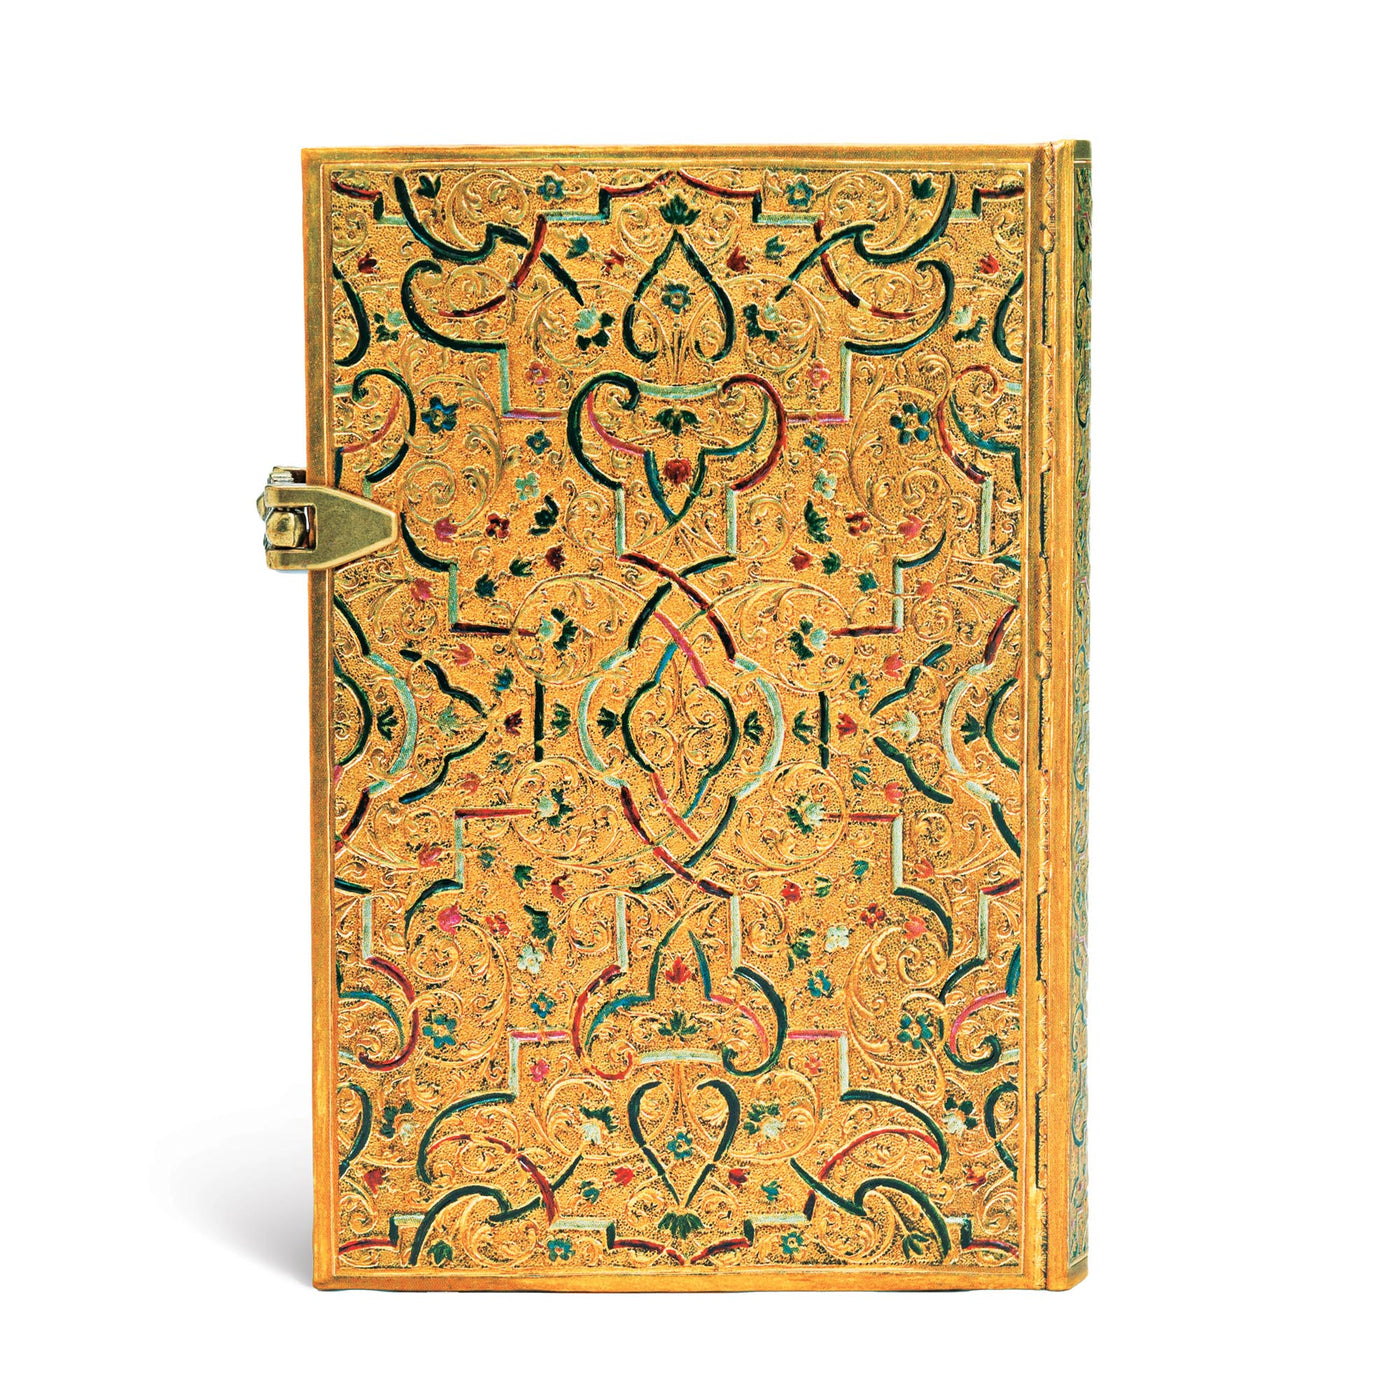 Paperblanks Gold Inlay Mini 4 x 5.5 Inch Lined Journal